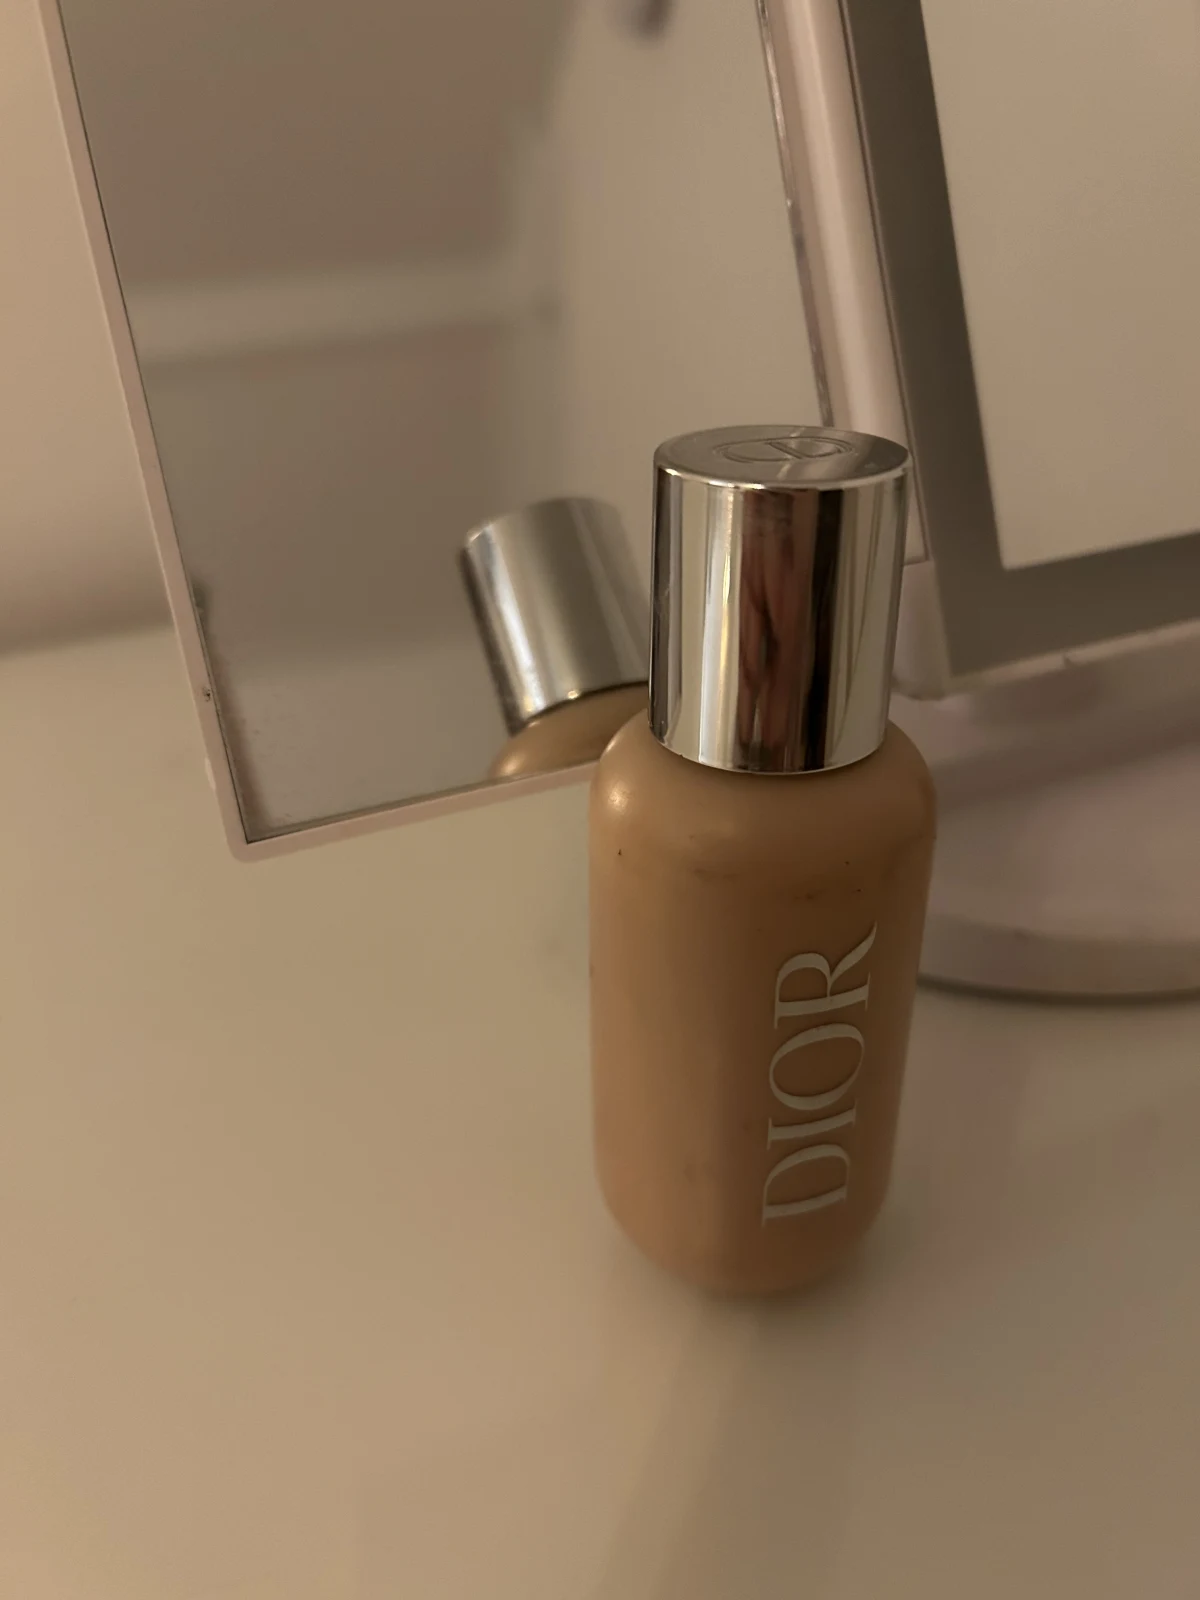 DIOR BACKSTAGE 1,5 - Neutral Face & Body Foundation 50g - before review image